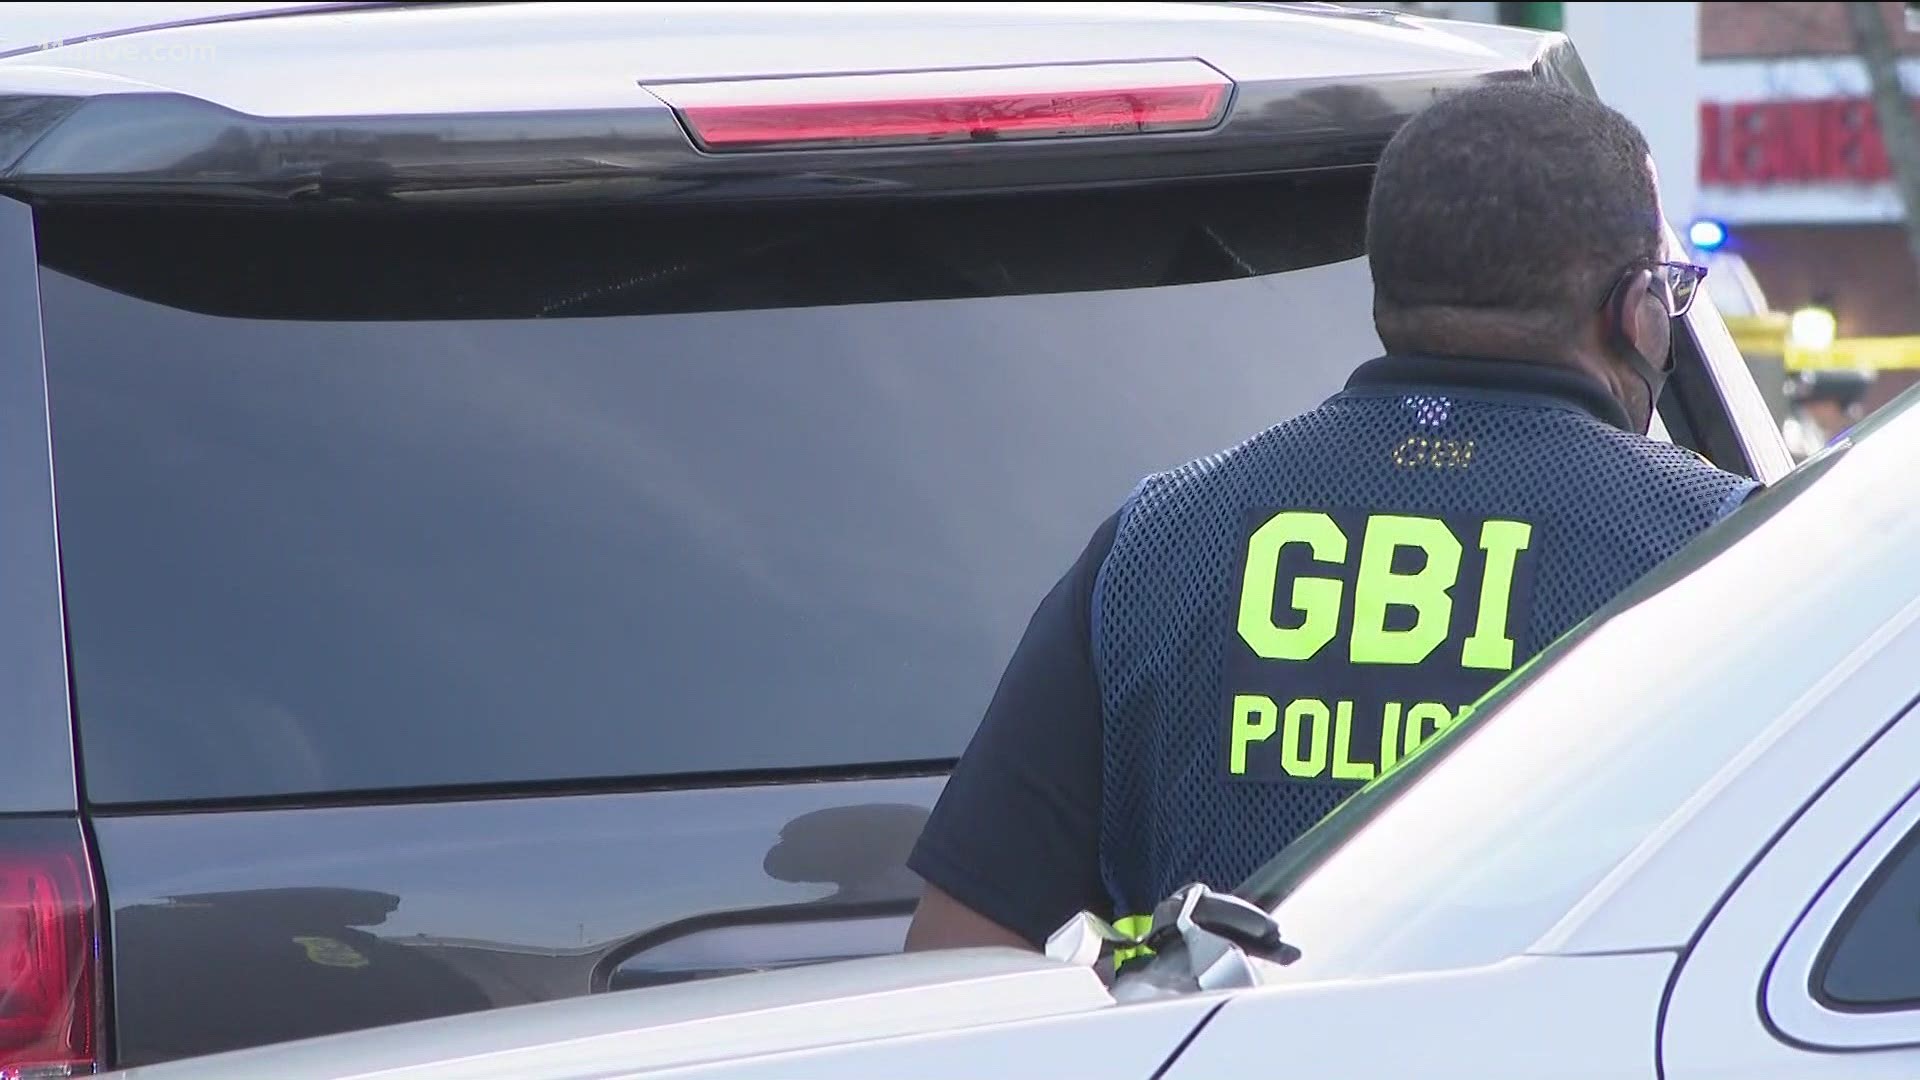 The GBI said the man, who is in critical condition, allegedly approached the officer and refused multiple commands to drop the weapon.